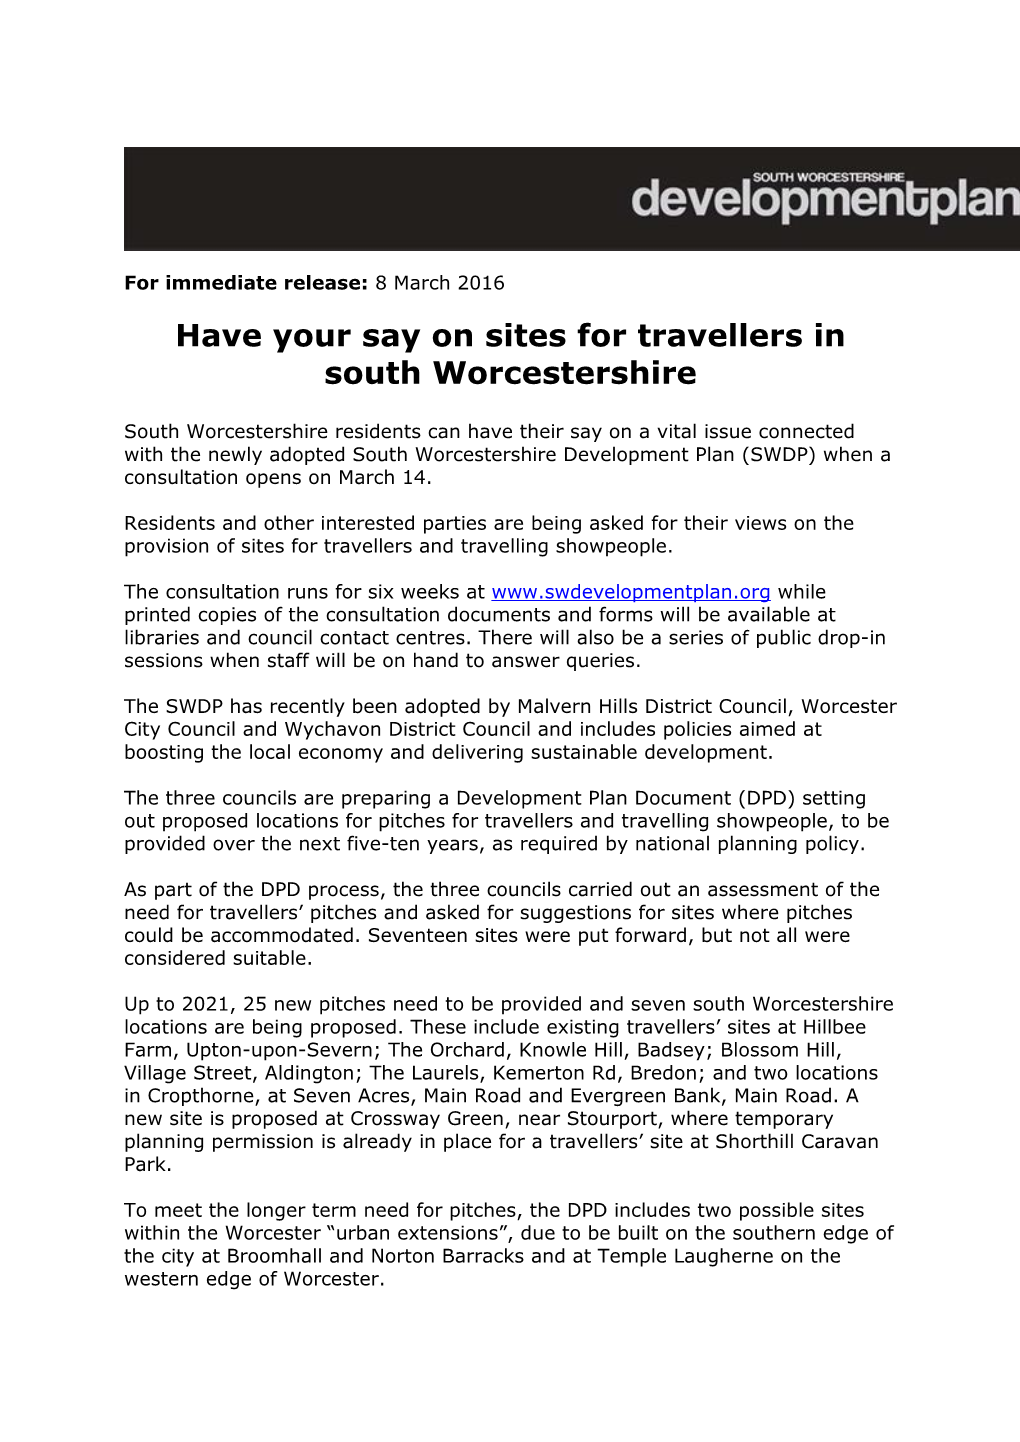 Have Your Say on Sites for Travellers in South Worcestershire